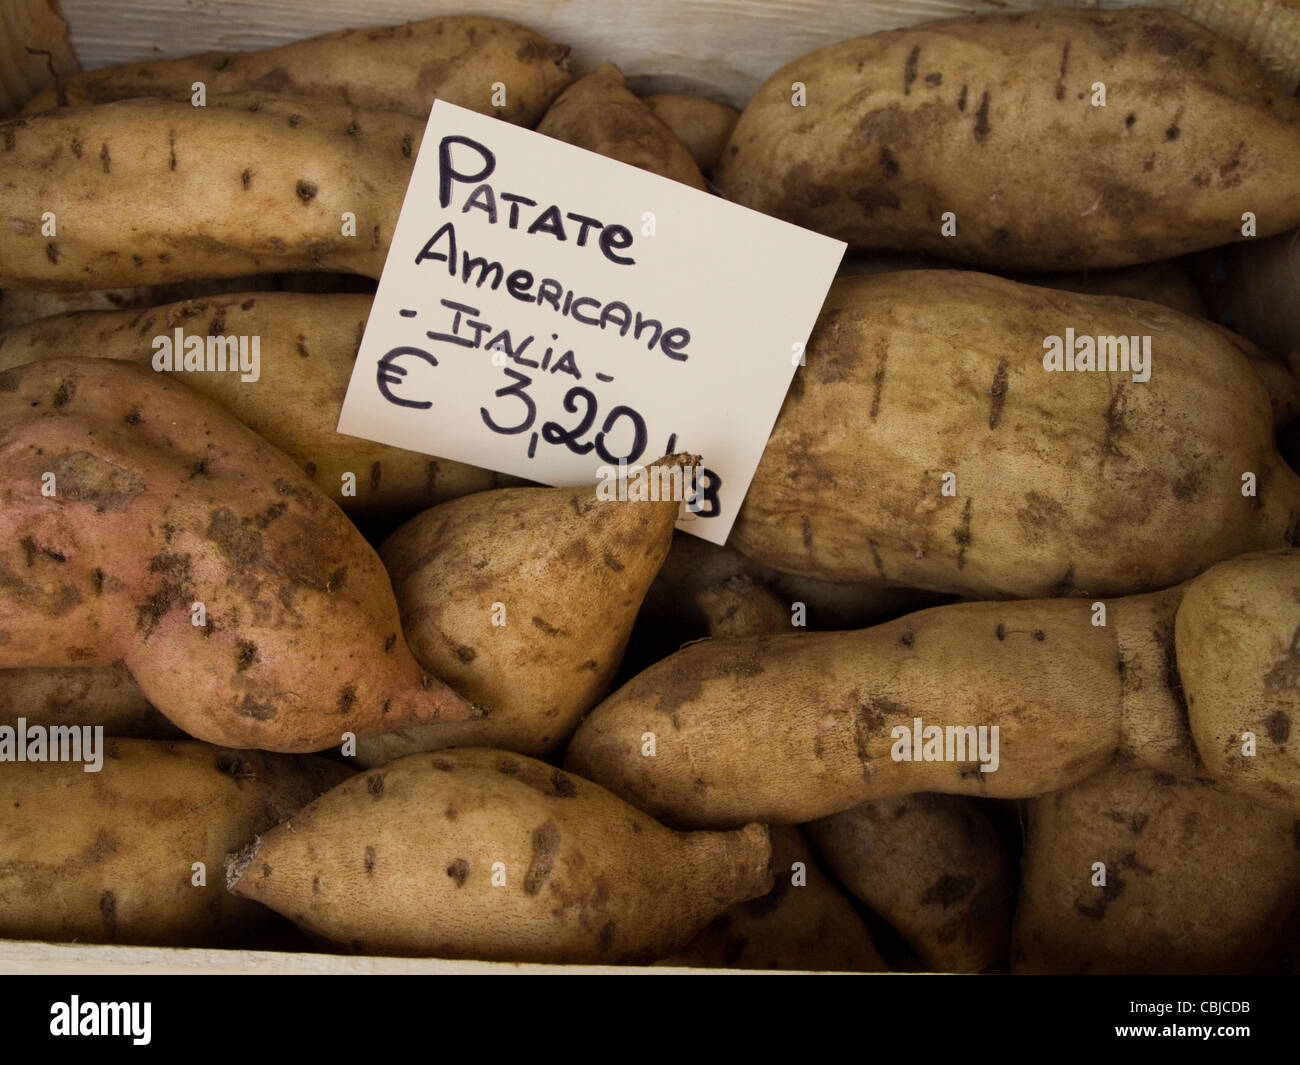 Sweet Potatoes in the market, Courmayeur, Italy, note that the Italian name, Patate Americane, means 'American Potatoes. Stock Photo